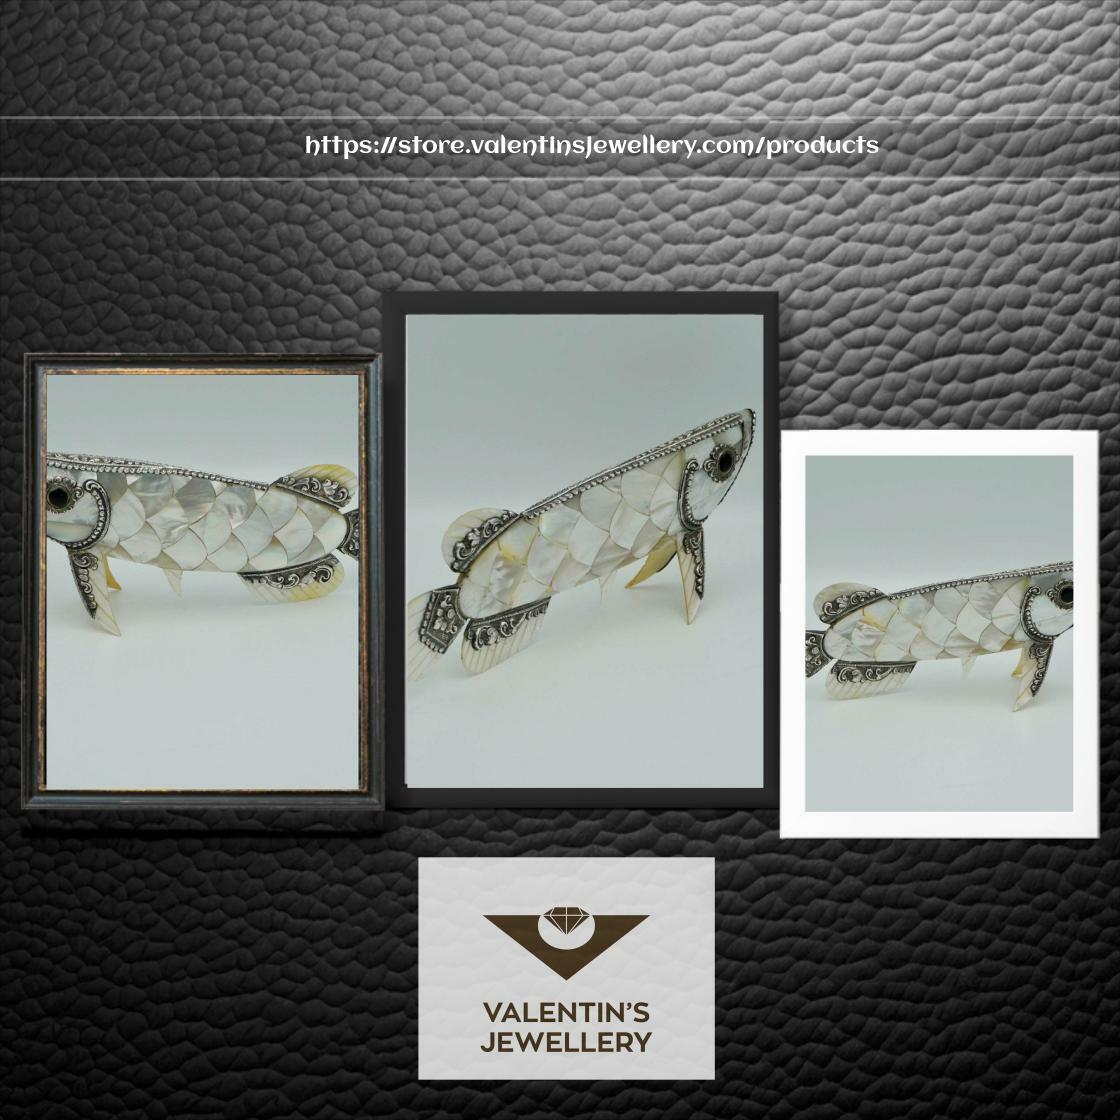 Top offer of the season! Metal fish décor, Fish statue, Fish sculpture, Sterling Silver AROWANA Fish Best for Container and Decorator for Interior, now at an exclusive price of €450
store.valentinsjewellery.com/products/Metal…
#BrownAgateBrooch #Brooches